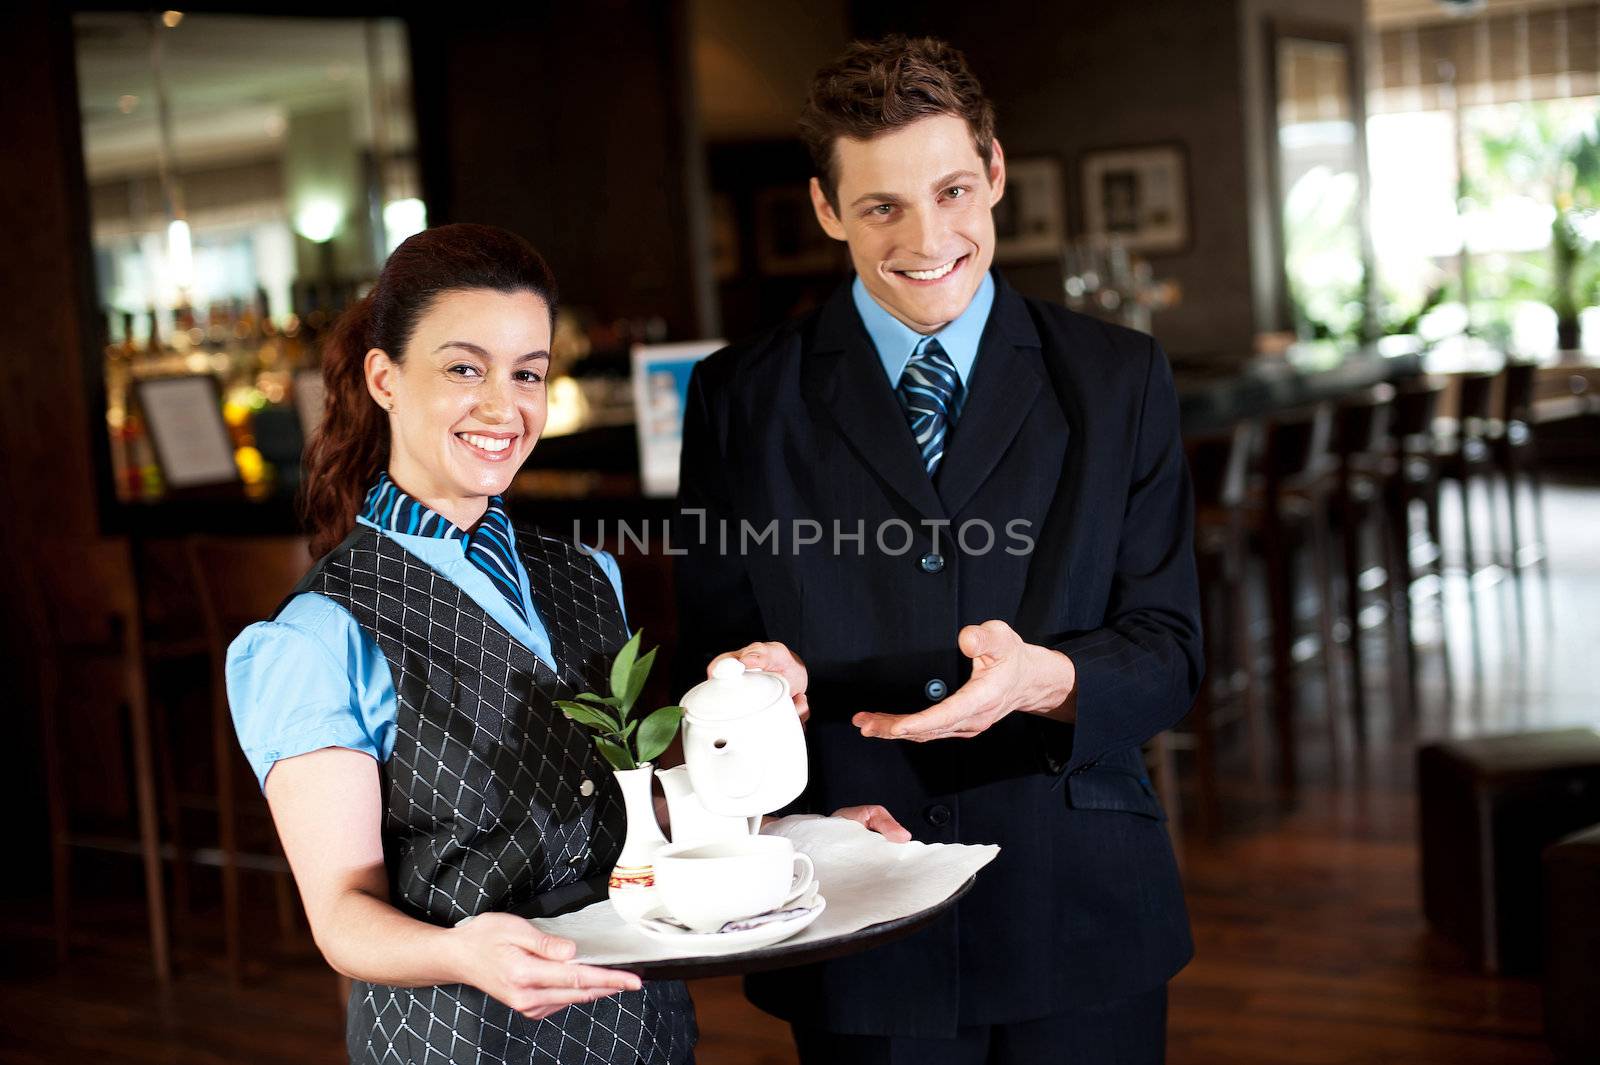 Here is cup of refreshing tea you ordered. Waitress holding tea tray as man pours